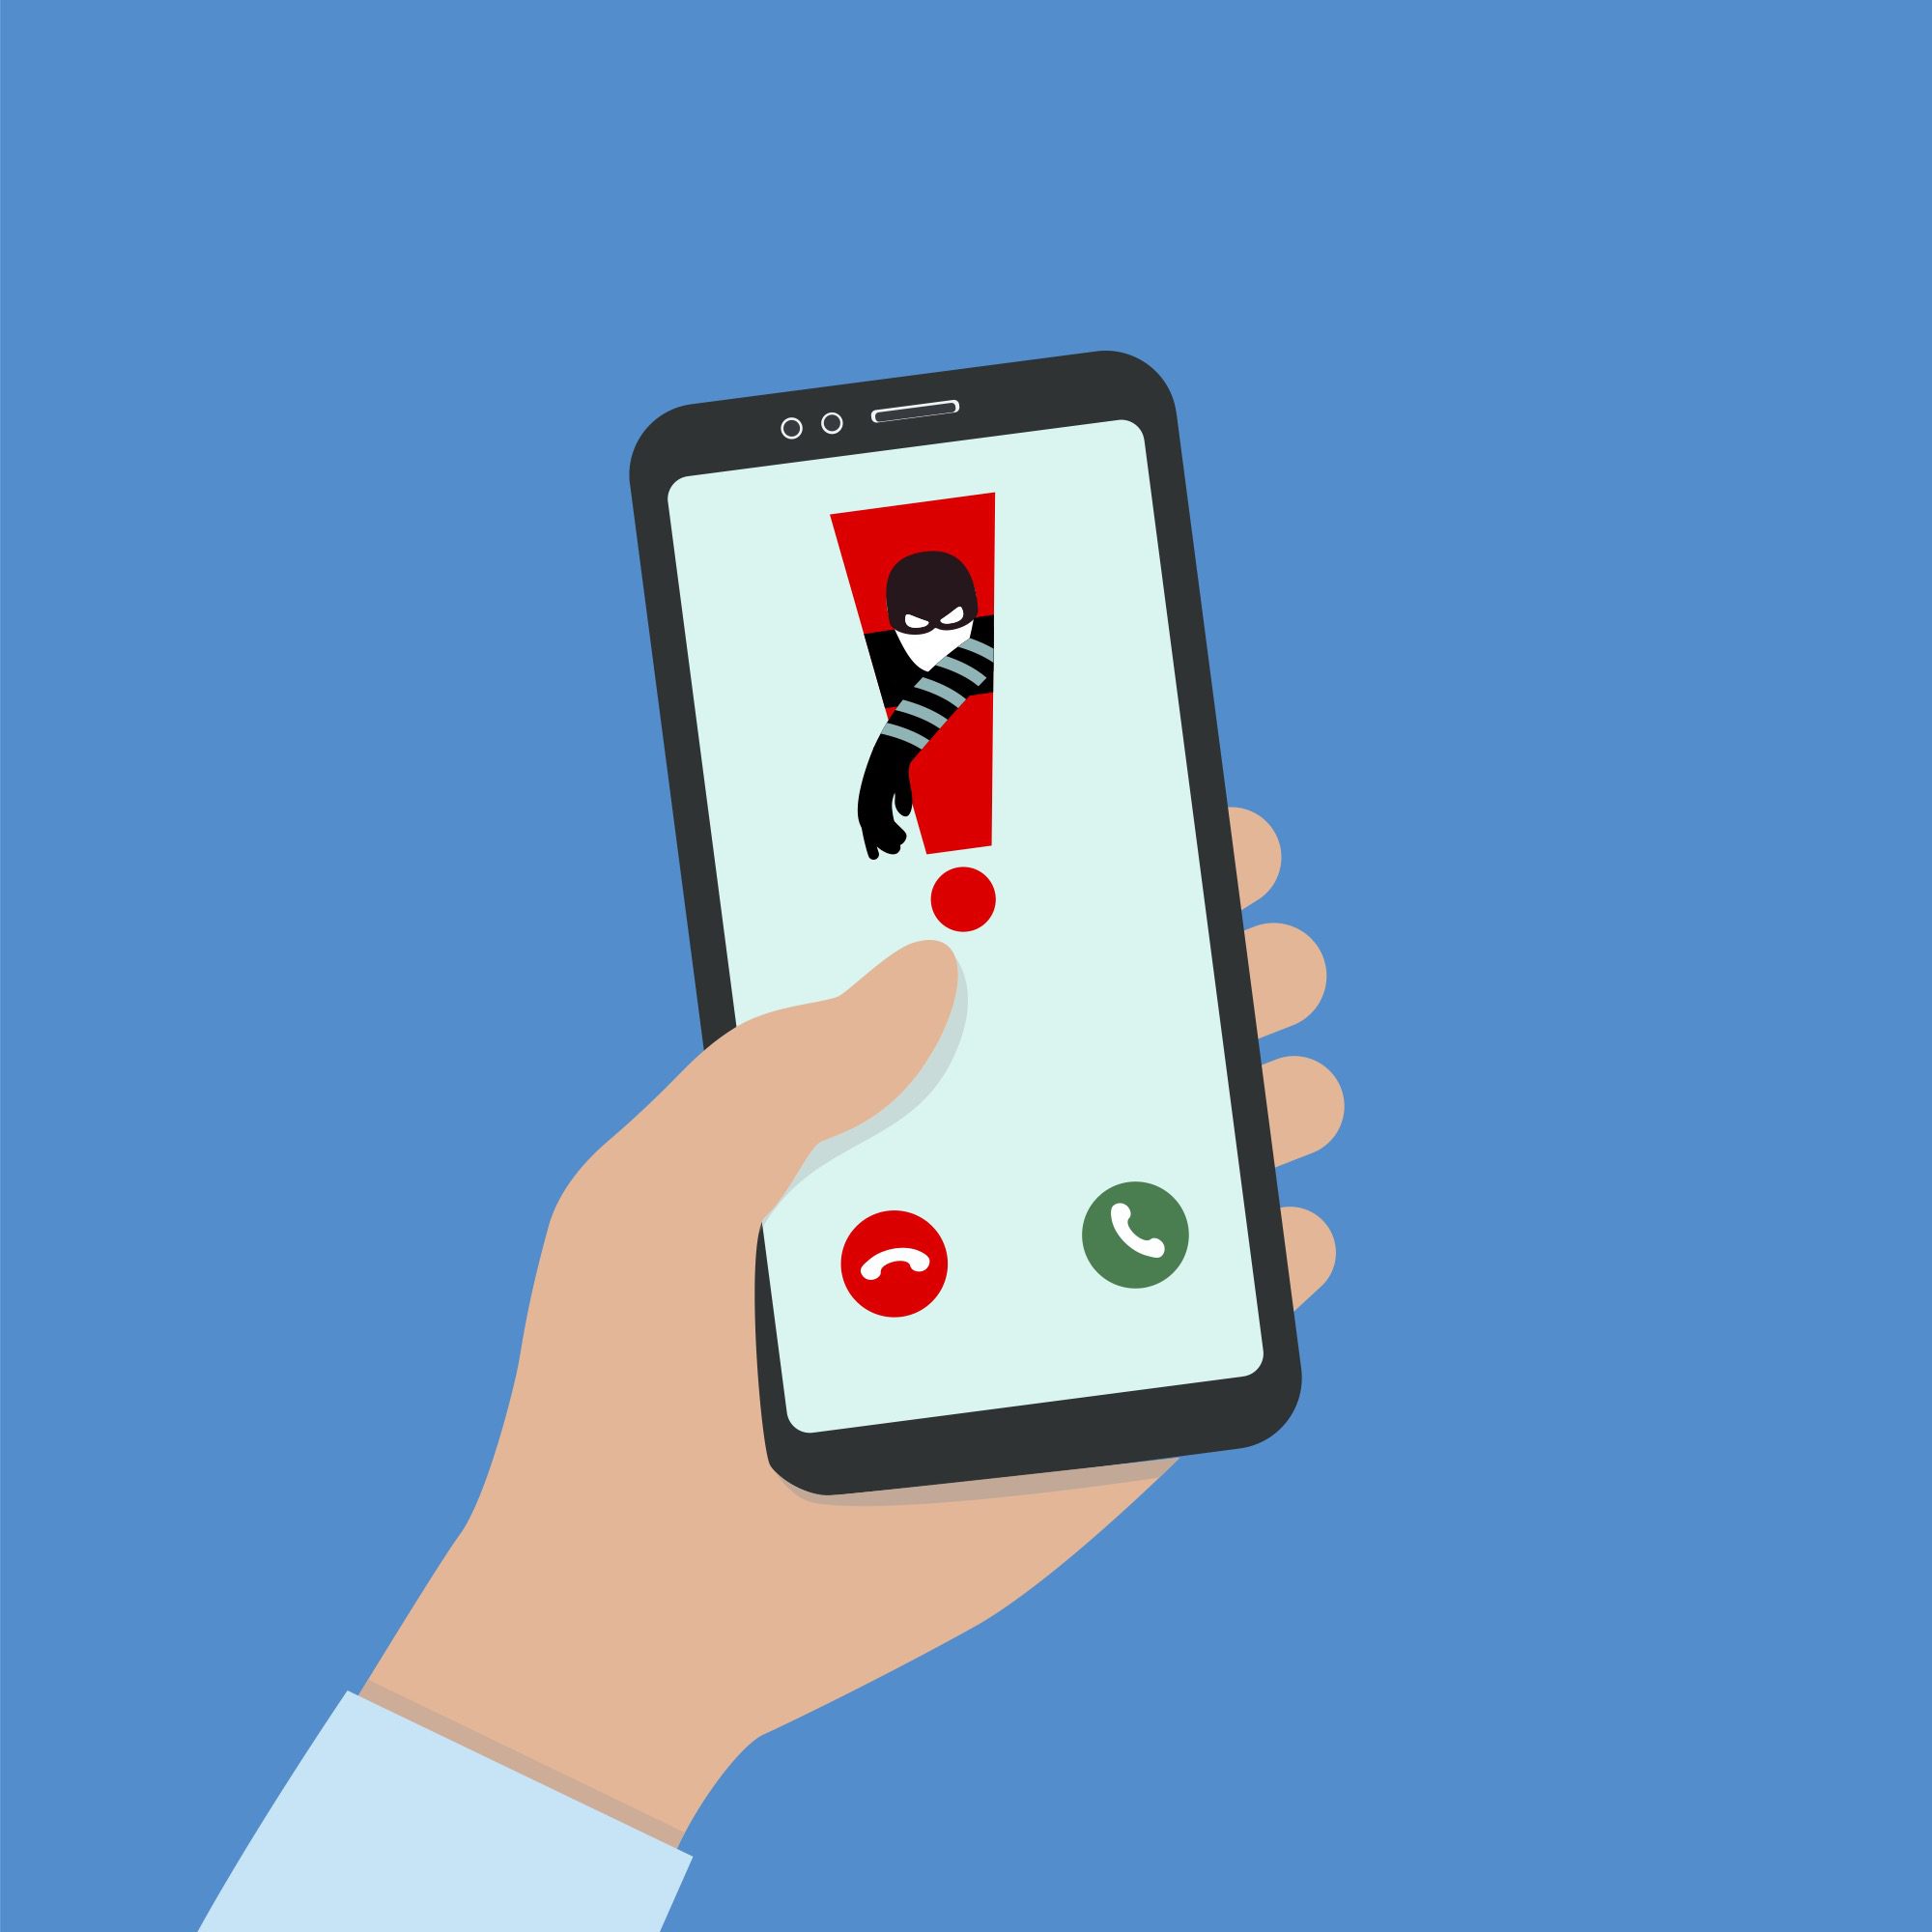 vector image of hand holding a cell phone with a spam theft call coming in.